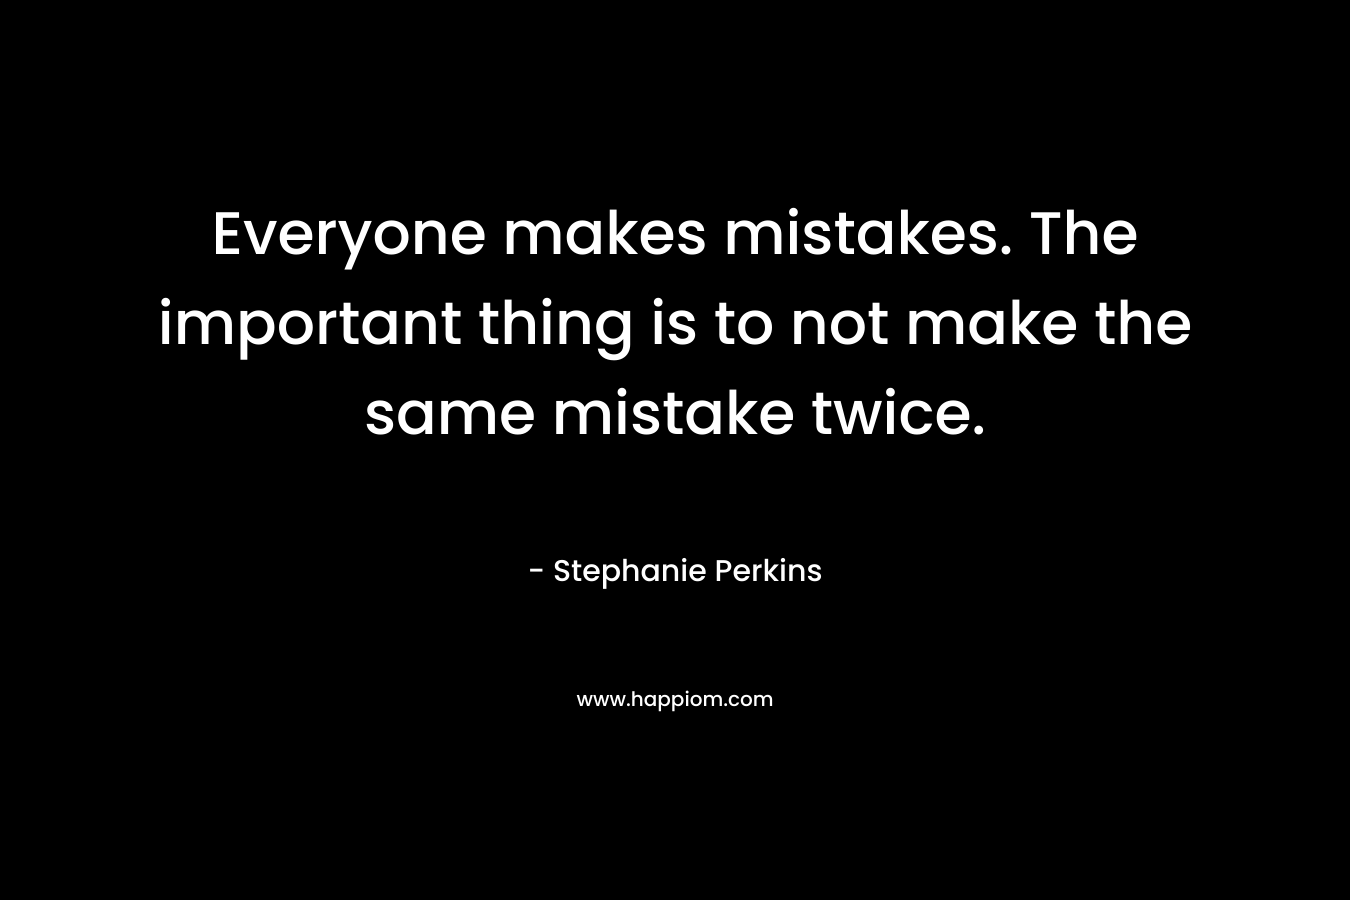 Everyone makes mistakes. The important thing is to not make the same mistake twice.